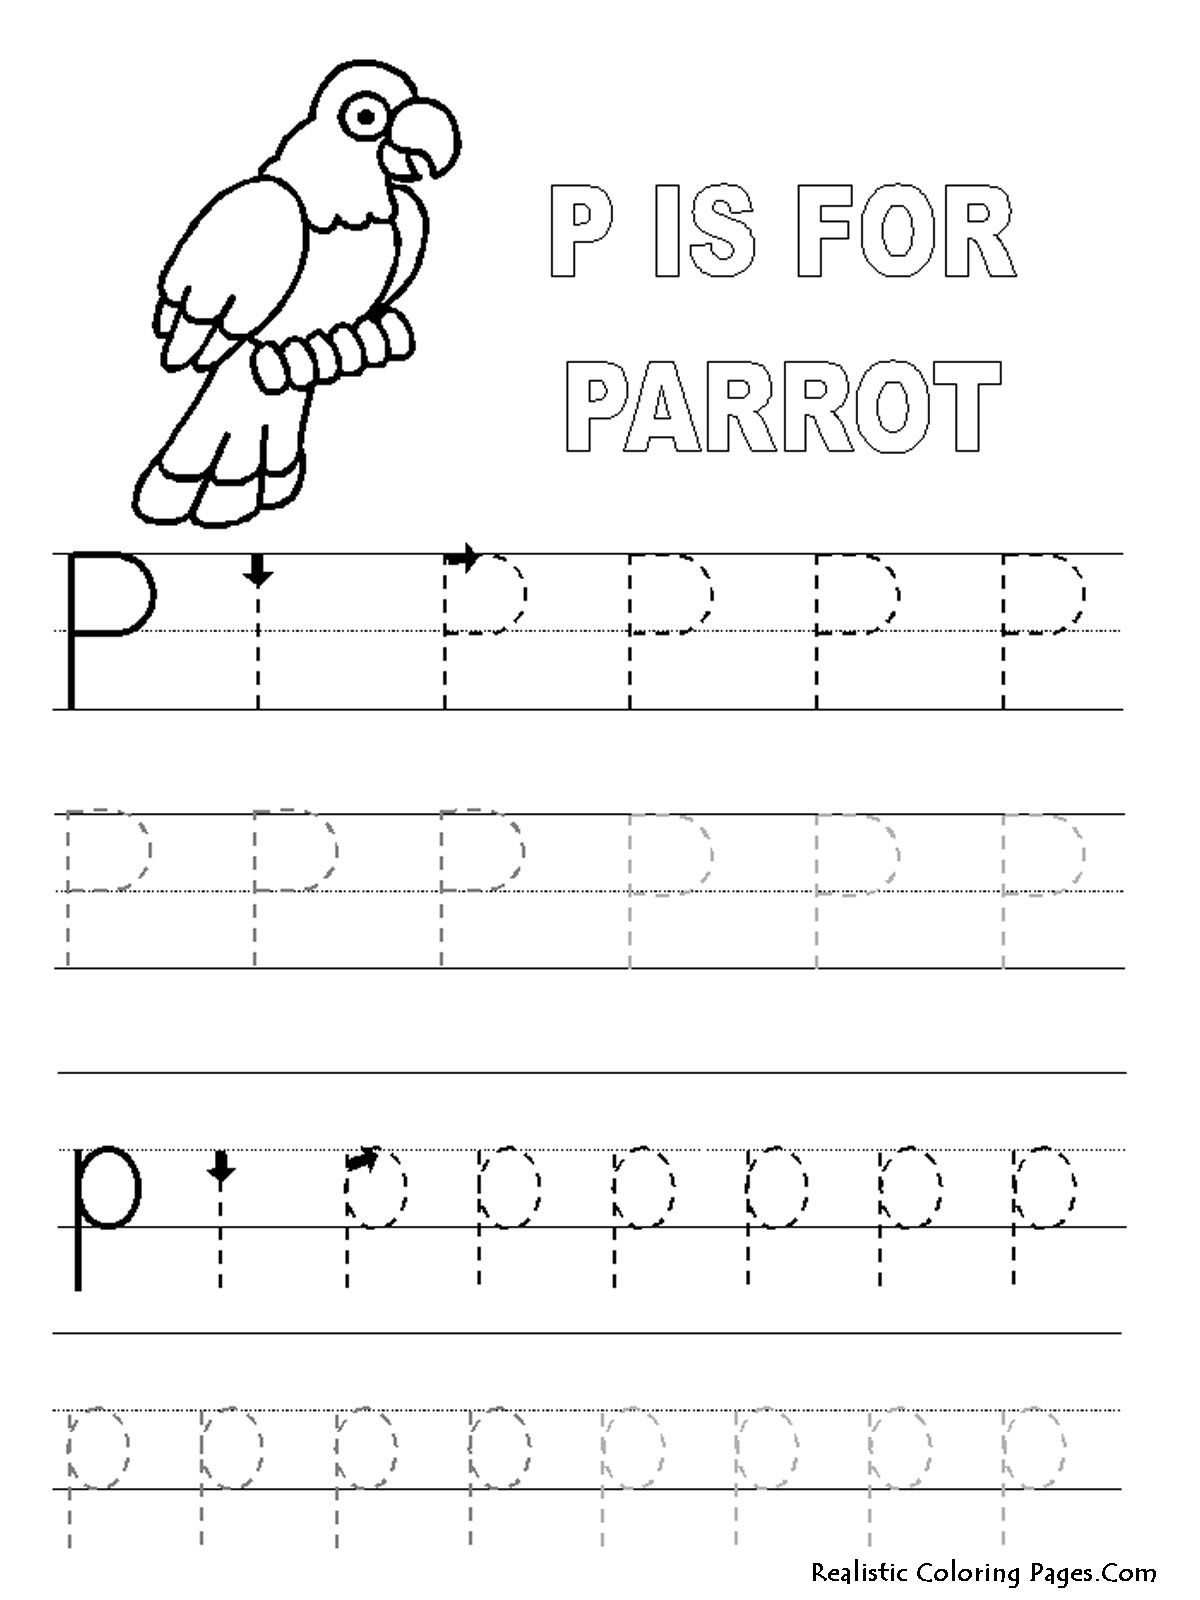 Letters alphabet coloring pages realistic coloring pages preschool letter p worksheets alphabet coloring pages free preschool worksheets